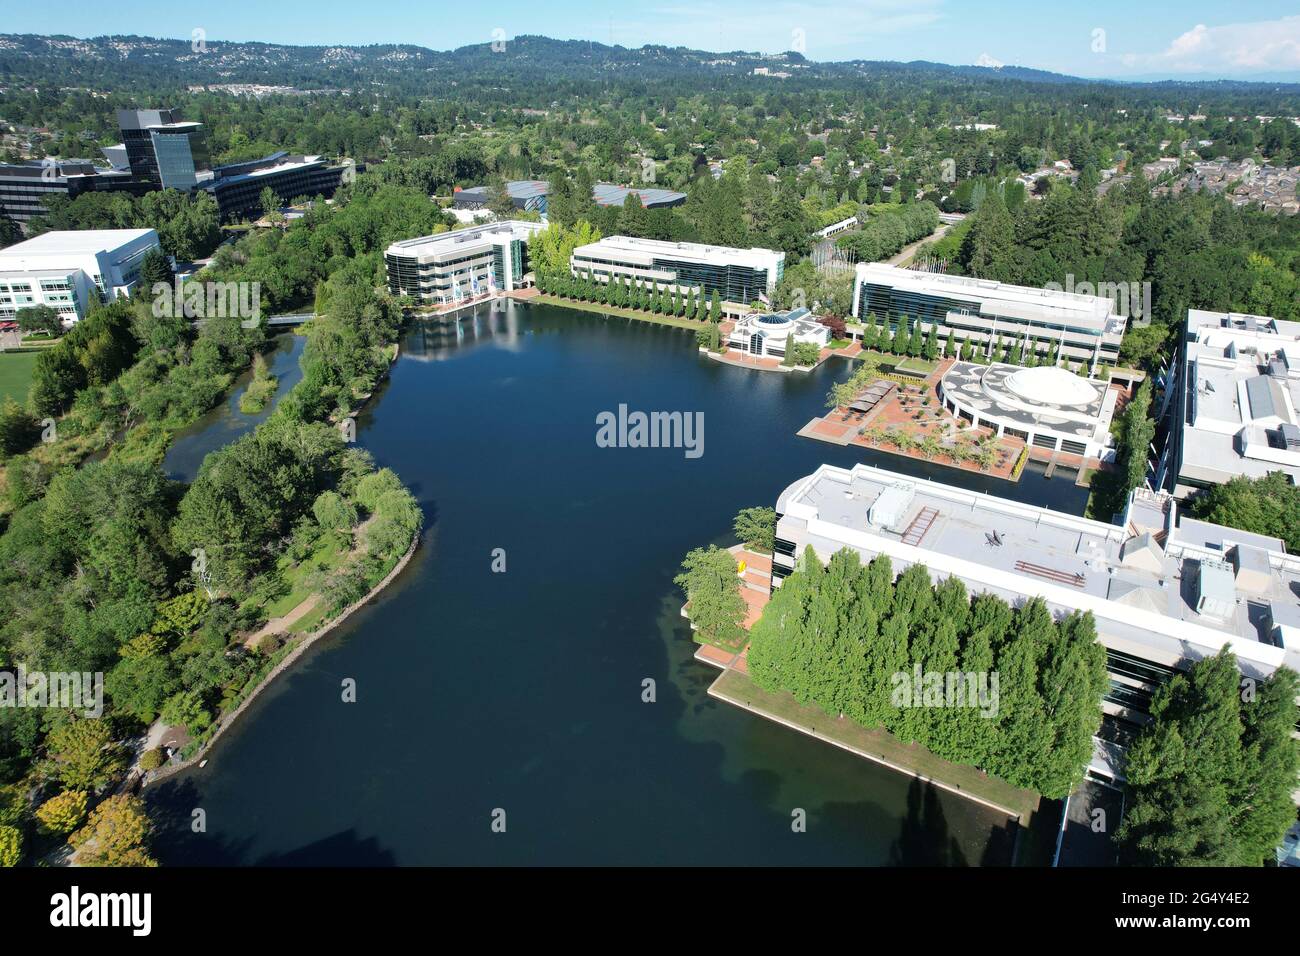 An aerial view of the Nike World Headquarters, Wednesday, June 23, 2021, in Beaverton, Ore. Stock Photo